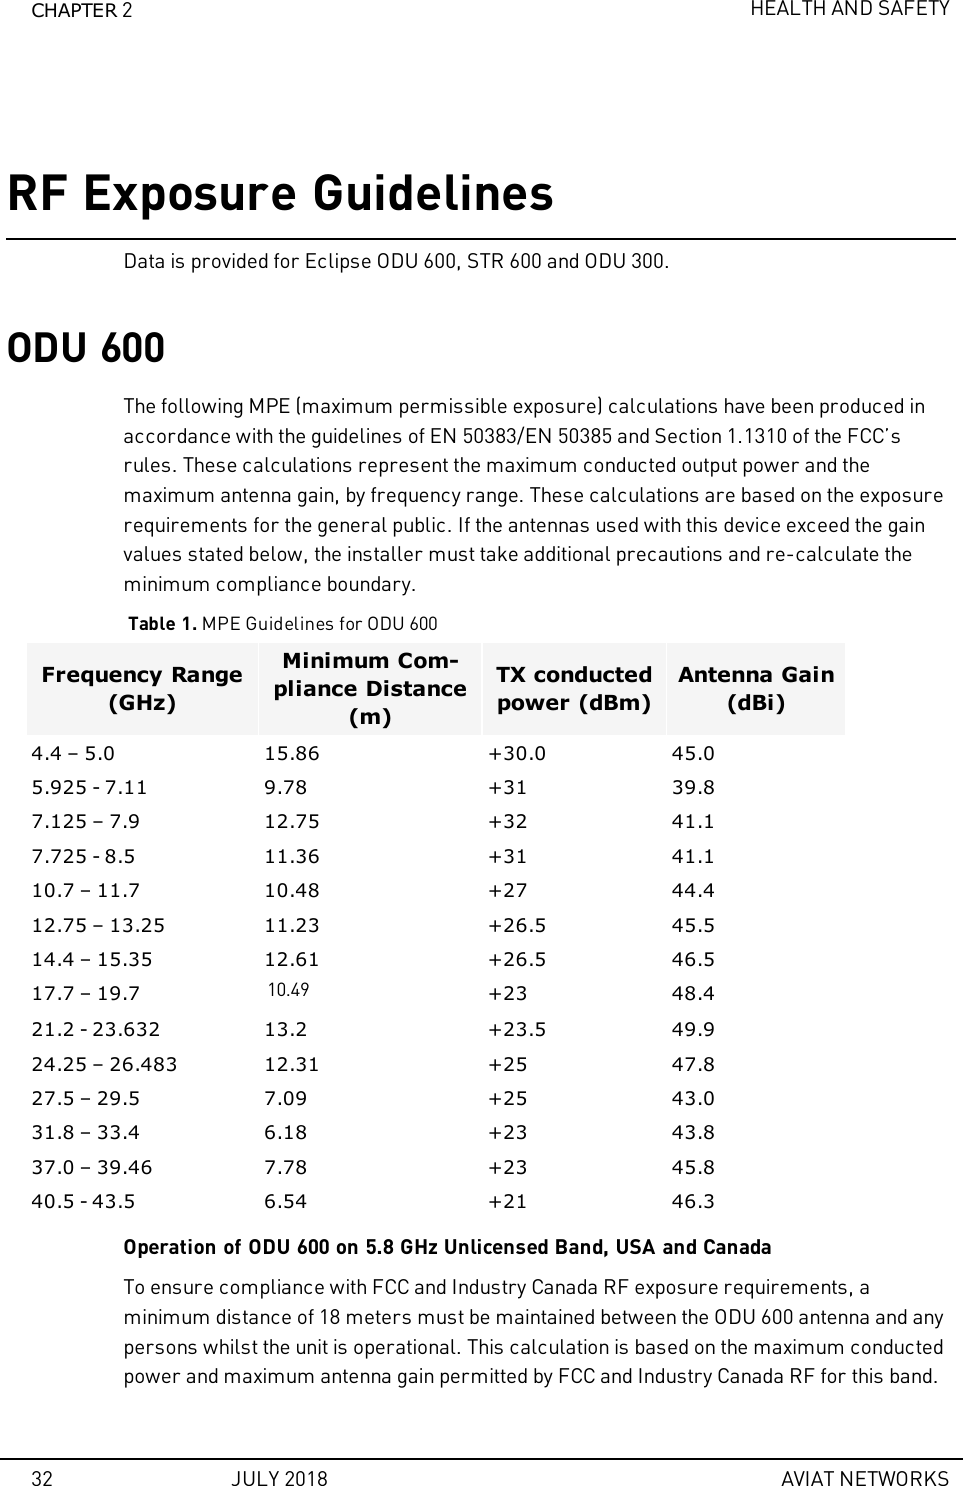 CHAPTER 2HEALTH AND SAFETYRF Exposure GuidelinesData is provided for Eclipse ODU 600, STR 600 and ODU 300.ODU 600The following MPE (maximum permissible exposure) calculations have been produced inaccordance with the guidelines of EN 50383/EN 50385 and Section 1.1310 of the FCC’srules. These calculations represent the maximum conducted output power and themaximum antenna gain, by frequency range. These calculations are based on the exposurerequirements for the general public. If the antennas used with this device exceed the gainvalues stated below, the installer must take additional precautions and re-calculate theminimum compliance boundary.Table 1. MPE Guidelines for ODU 600Frequency Range(GHz)Minimum Com-pliance Distance(m)TX conductedpower (dBm)Antenna Gain(dBi)4.4 – 5.0 15.86 +30.0 45.05.925 - 7.11 9.78 +31 39.87.125 – 7.9 12.75 +32 41.17.725 - 8.5 11.36 +31 41.110.7 – 11.7 10.48 +27 44.412.75 – 13.25 11.23 +26.5 45.514.4 – 15.35 12.61 +26.5 46.517.7 – 19.7 10.49 +23 48.421.2 - 23.632 13.2 +23.5 49.924.25 – 26.483 12.31 +25 47.827.5 – 29.5 7.09 +25 43.031.8 – 33.4 6.18 +23 43.837.0 – 39.46 7.78 +23 45.840.5 - 43.5 6.54 +21 46.3Operation of ODU 600 on 5.8 GHz Unlicensed Band, USA and CanadaTo ensure compliance with FCC and Industry Canada RF exposure requirements, aminimum distance of 18 meters must be maintained between the ODU 600 antenna and anypersons whilst the unit is operational. This calculation is based on the maximum conductedpower and maximum antenna gain permitted by FCC and Industry Canada RF for this band.32 JULY 2018 AVIAT NETWORKS